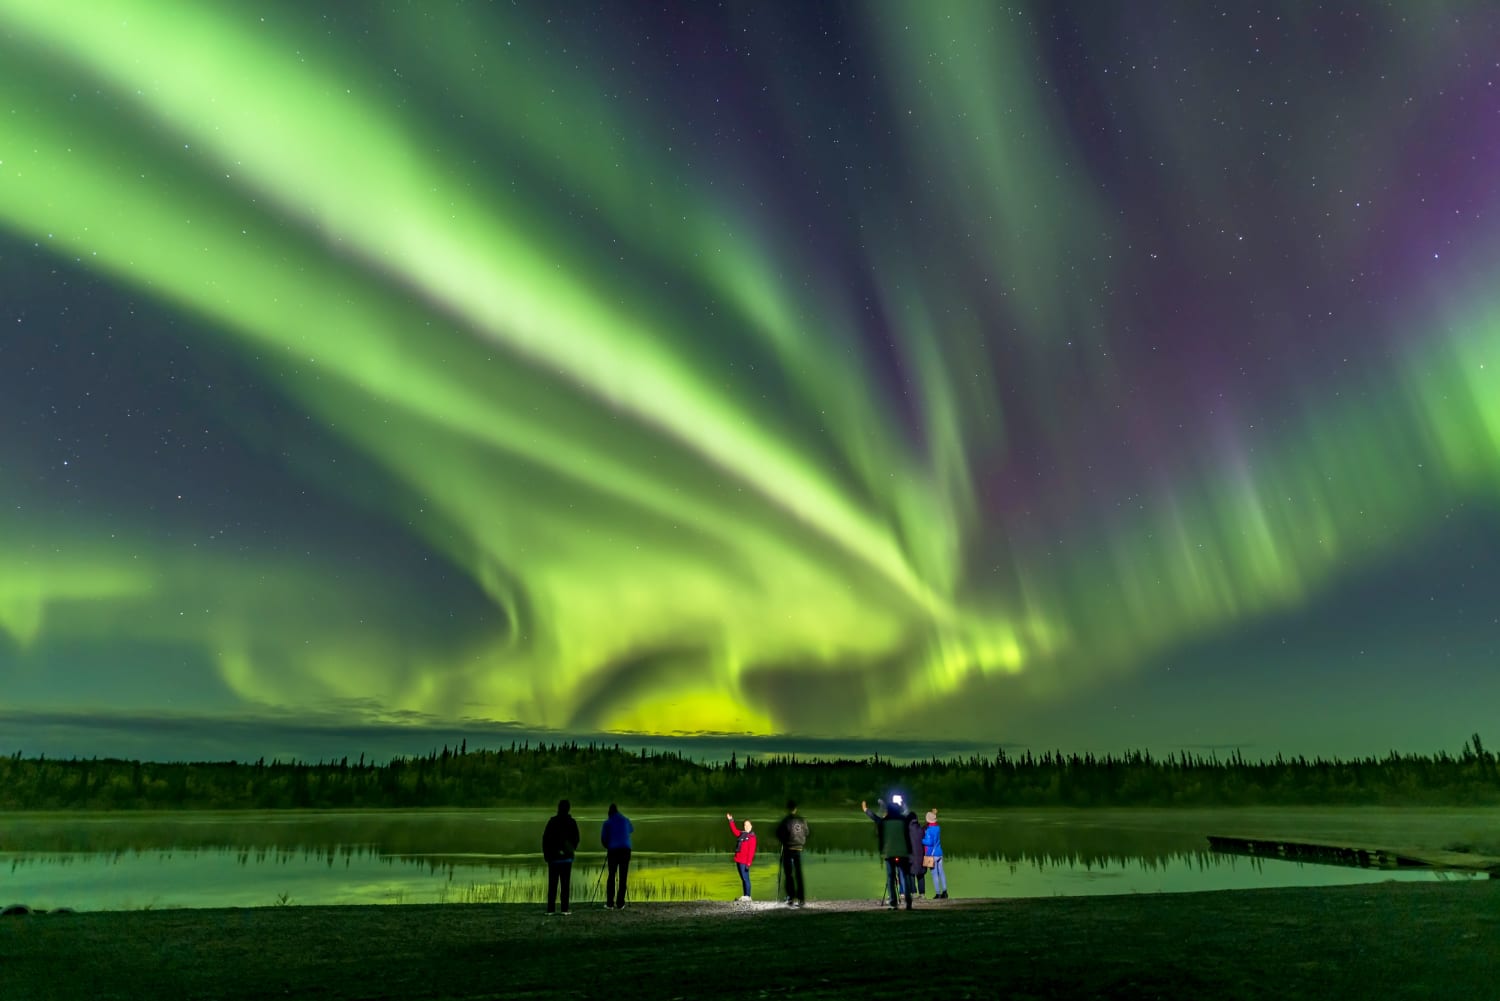 How scientists searched for the elusive sounds of the northern lights